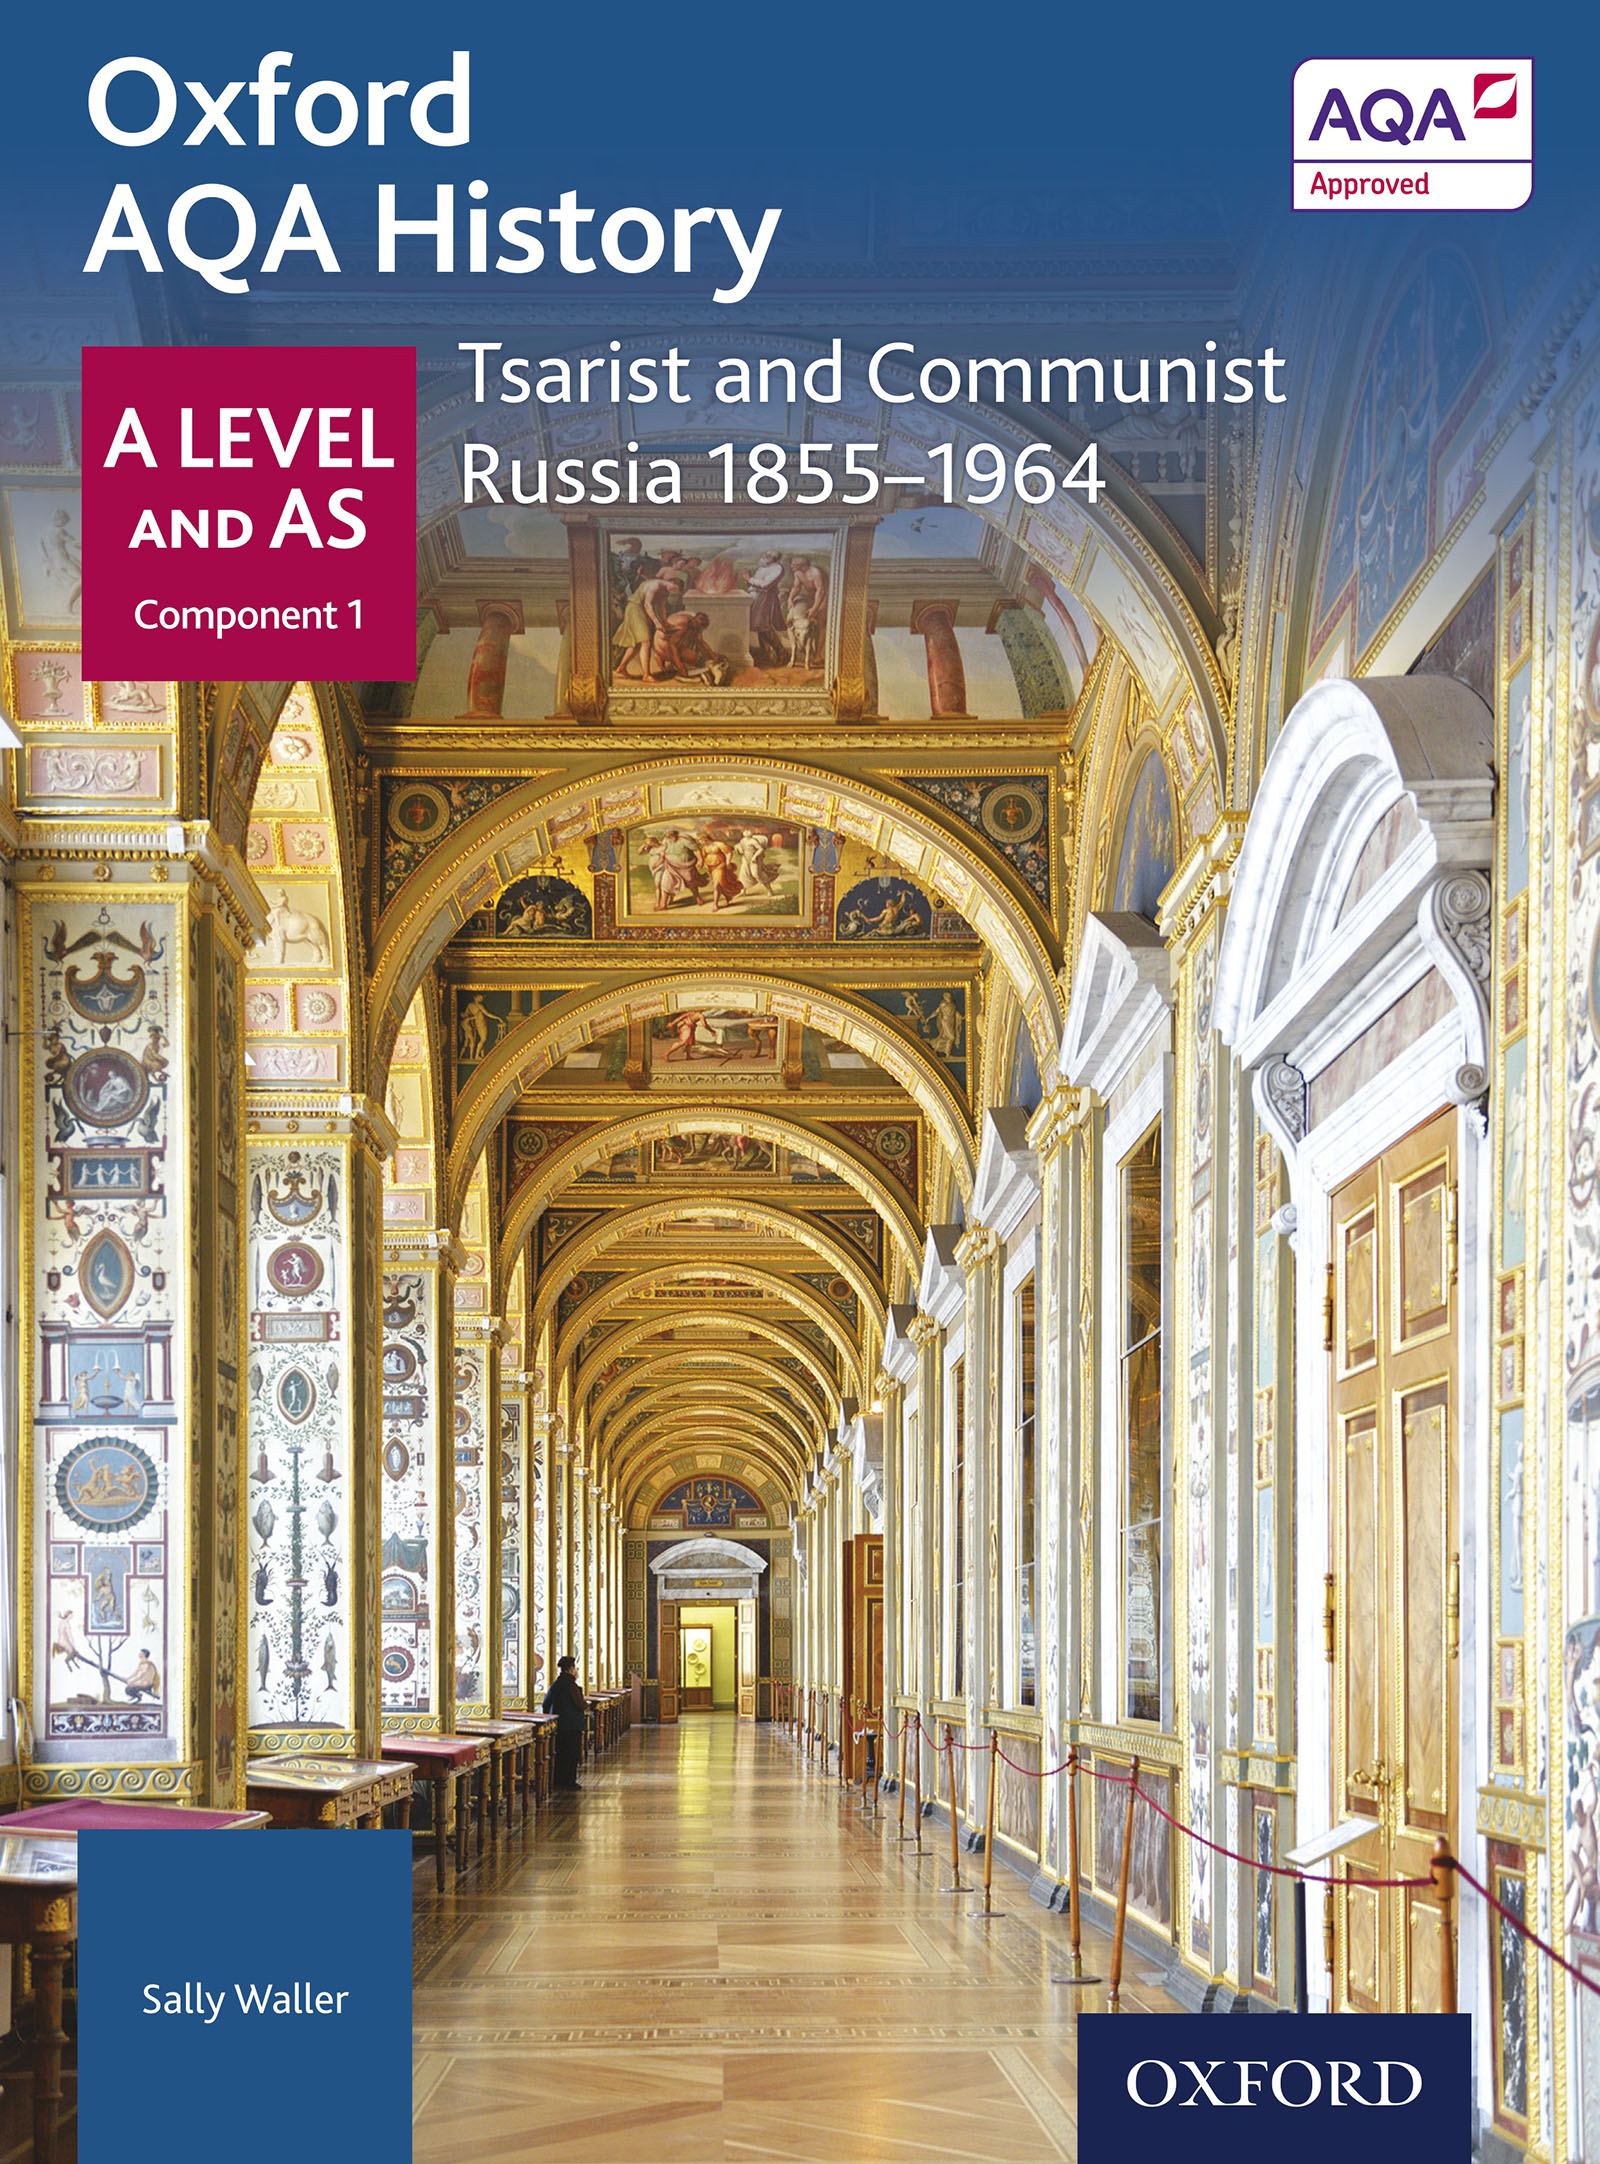 Oxford AQA History: A Level and AS Component 1: Tsarist and Communist Russia 1855-1963